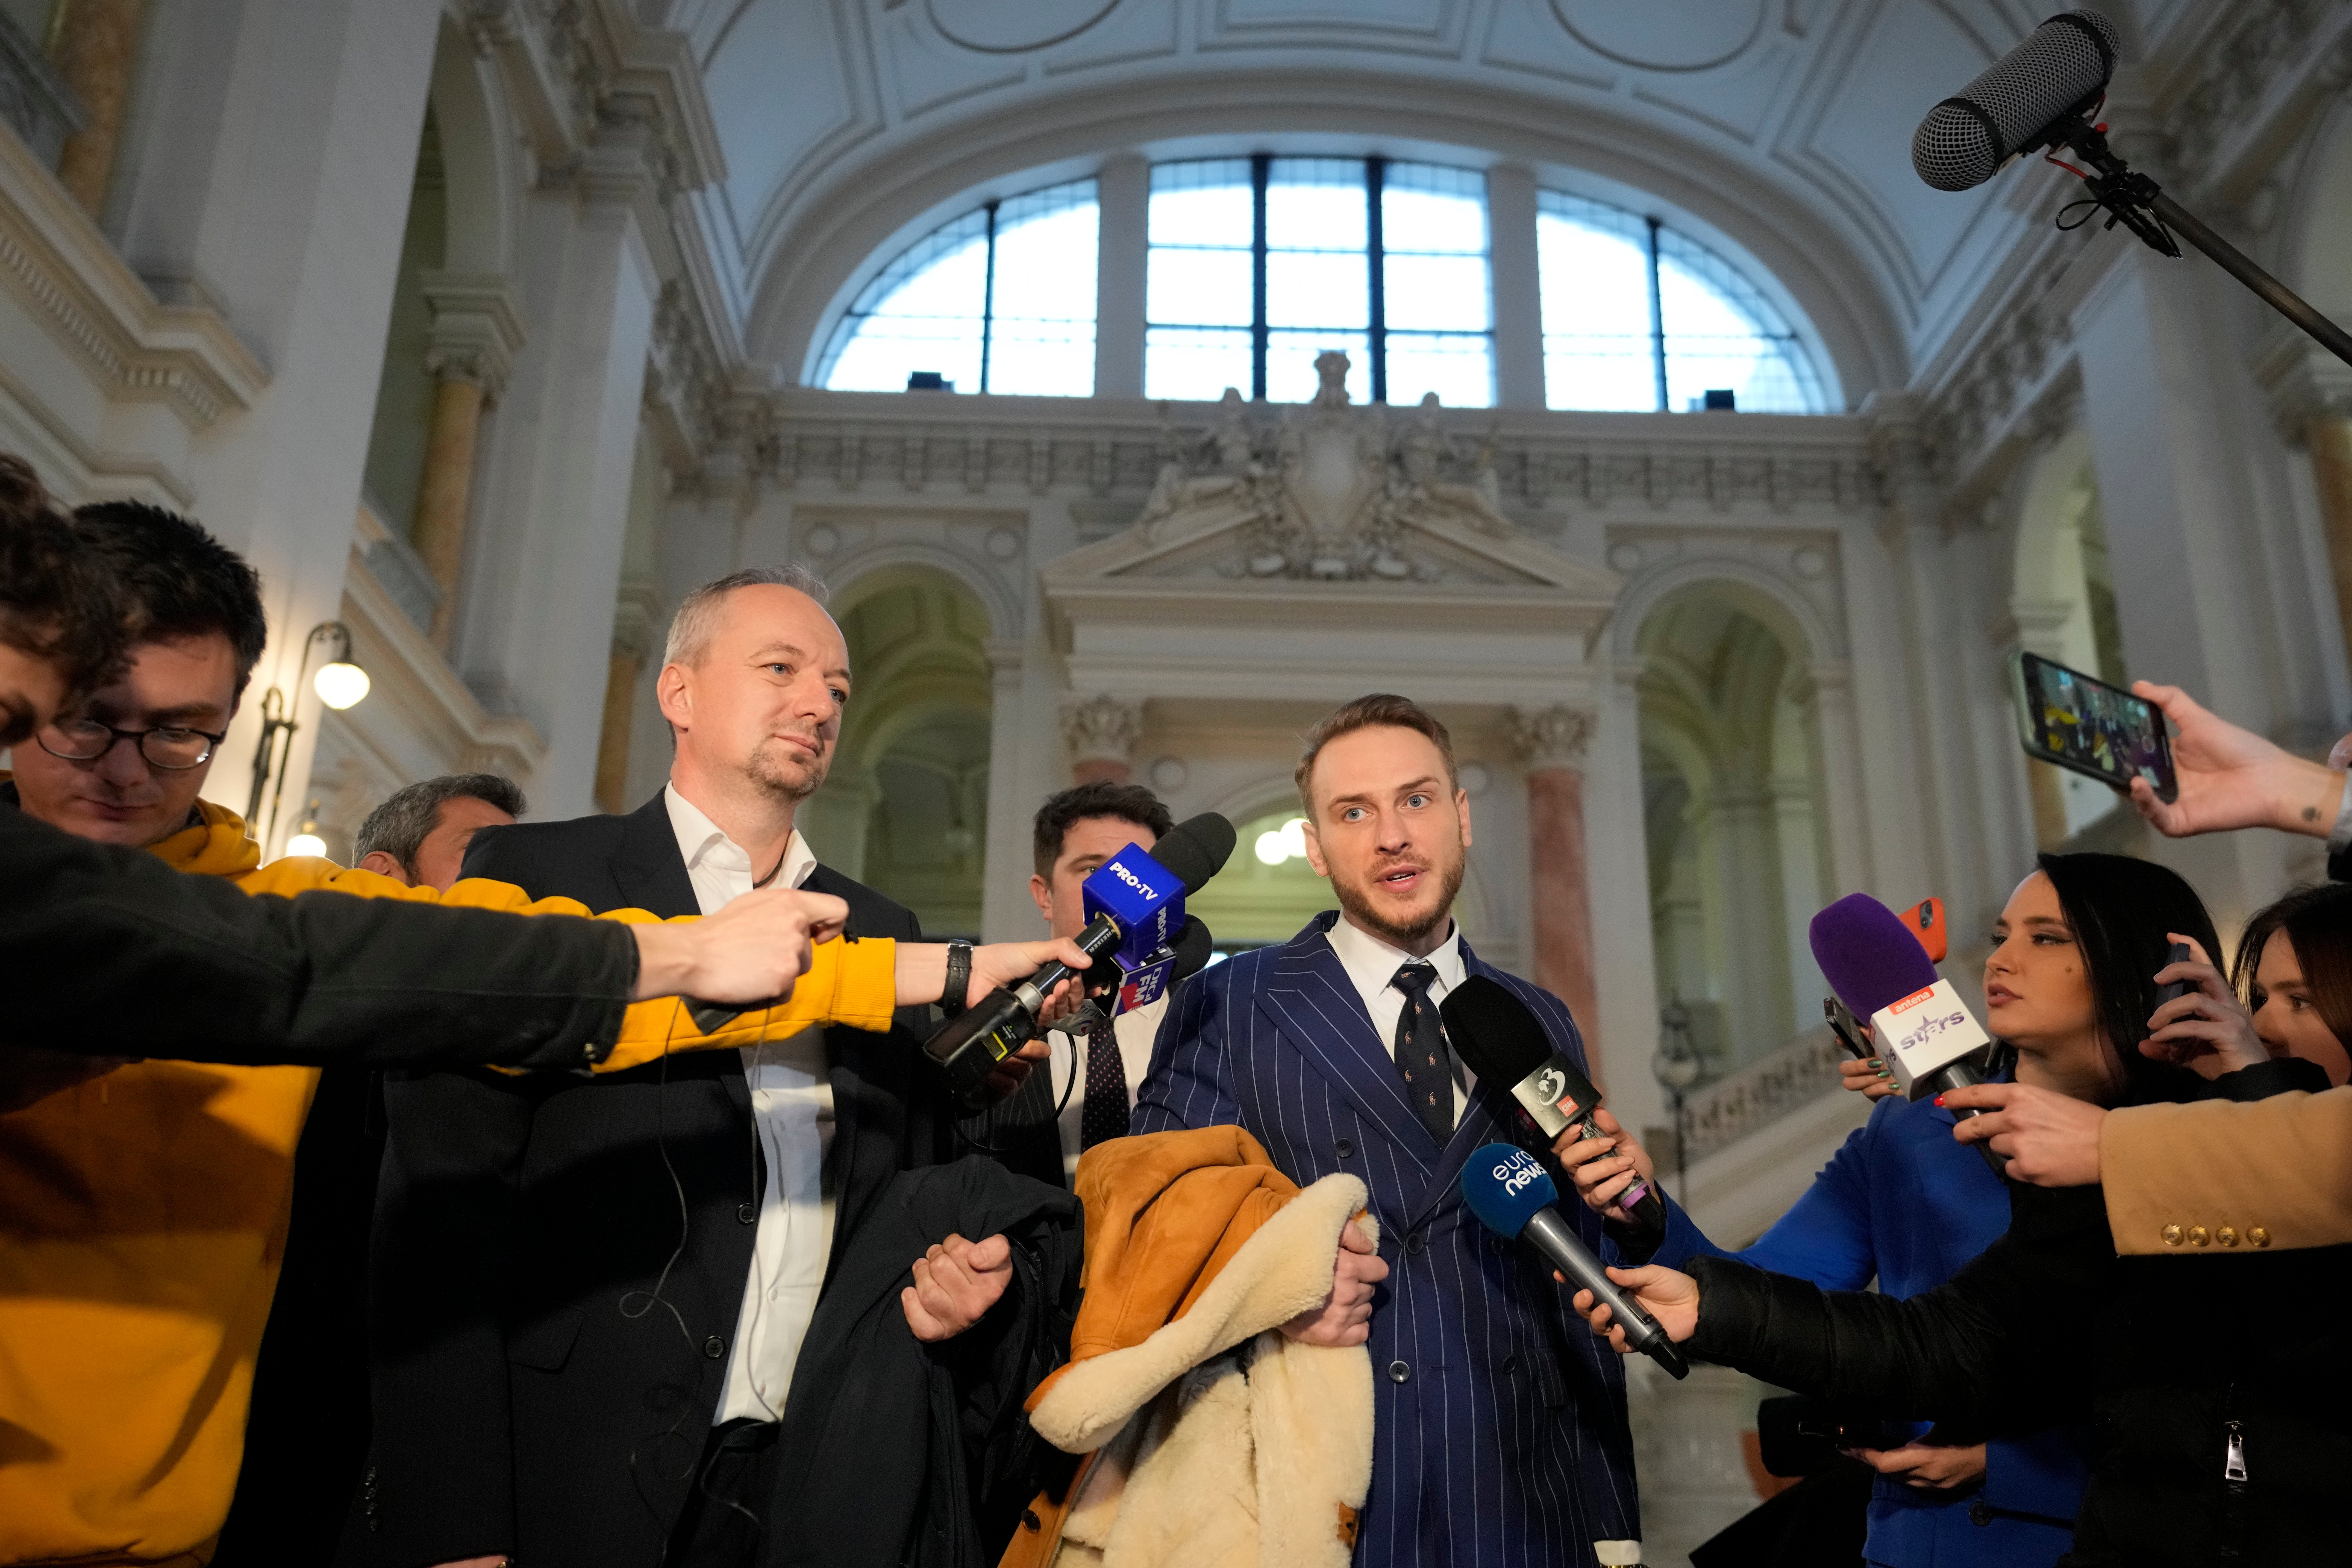 Lawyers Ioan Gliga, left, and Eugen Vidineac speak at the Court of Appeal in Bucharest